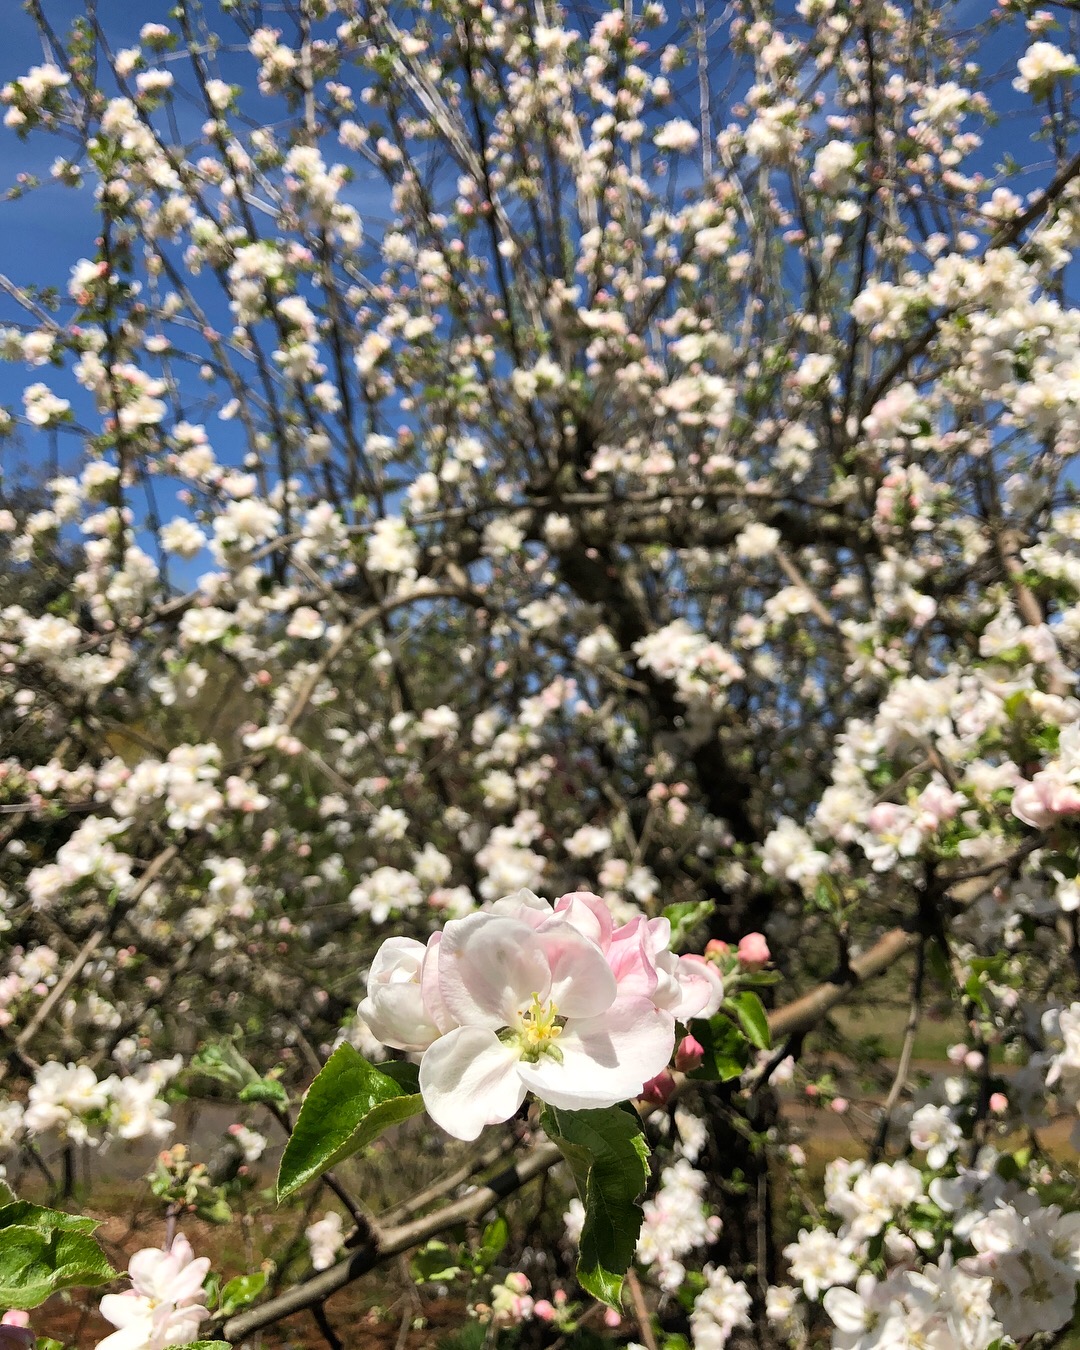 Orchard apples in bloom